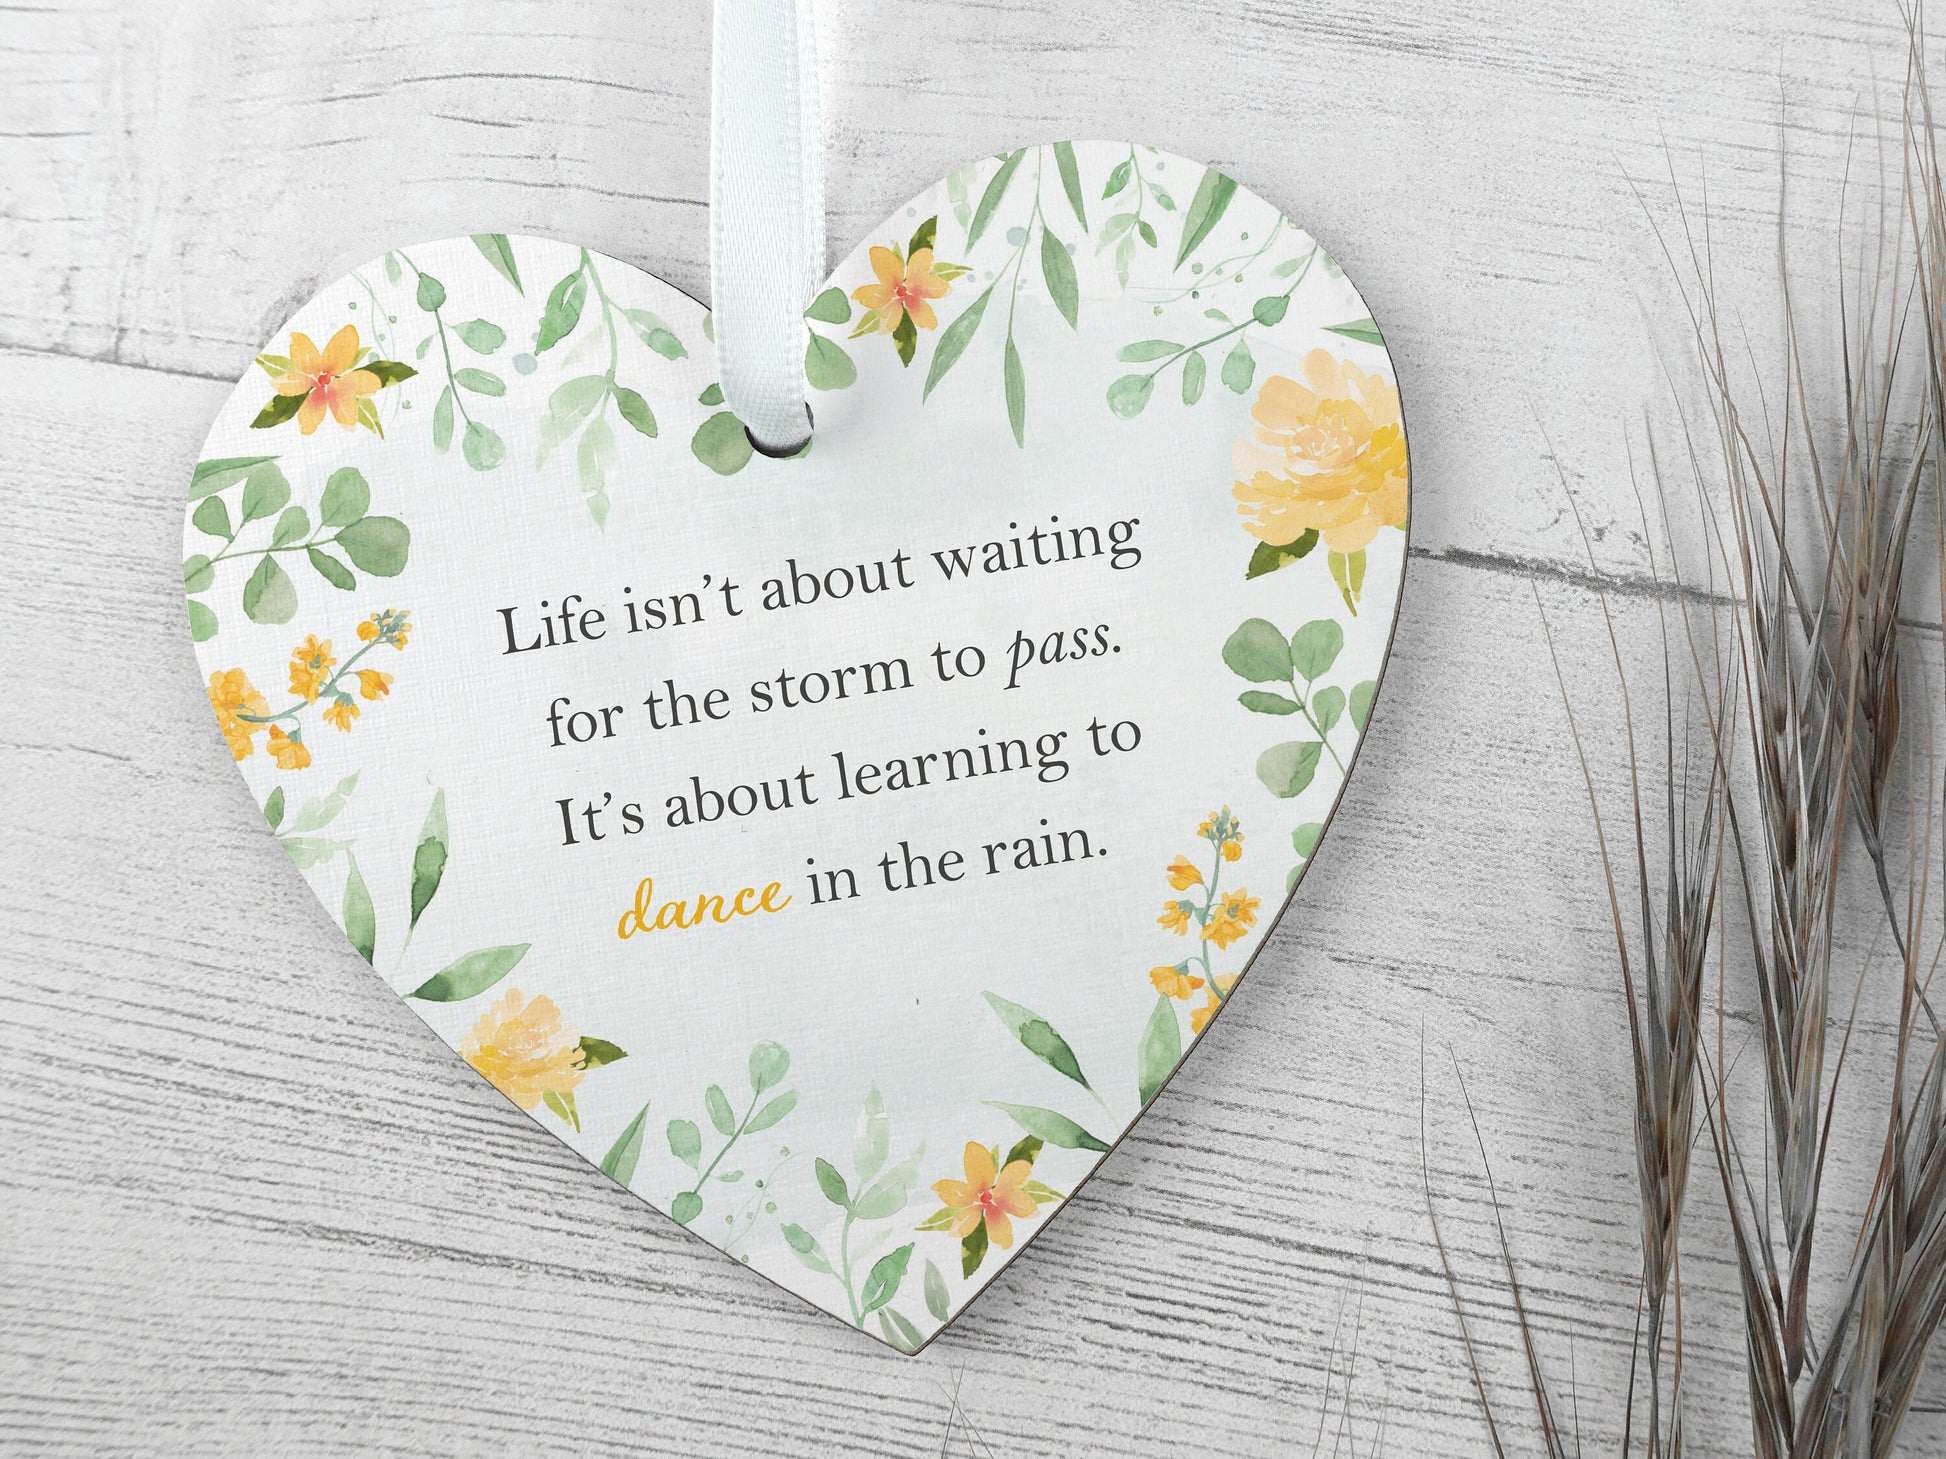 Gift for friend | Handmade wooden heart | Inspirational quote present | Gift for her | Best friend birthday gift | Friendship Quote LC057